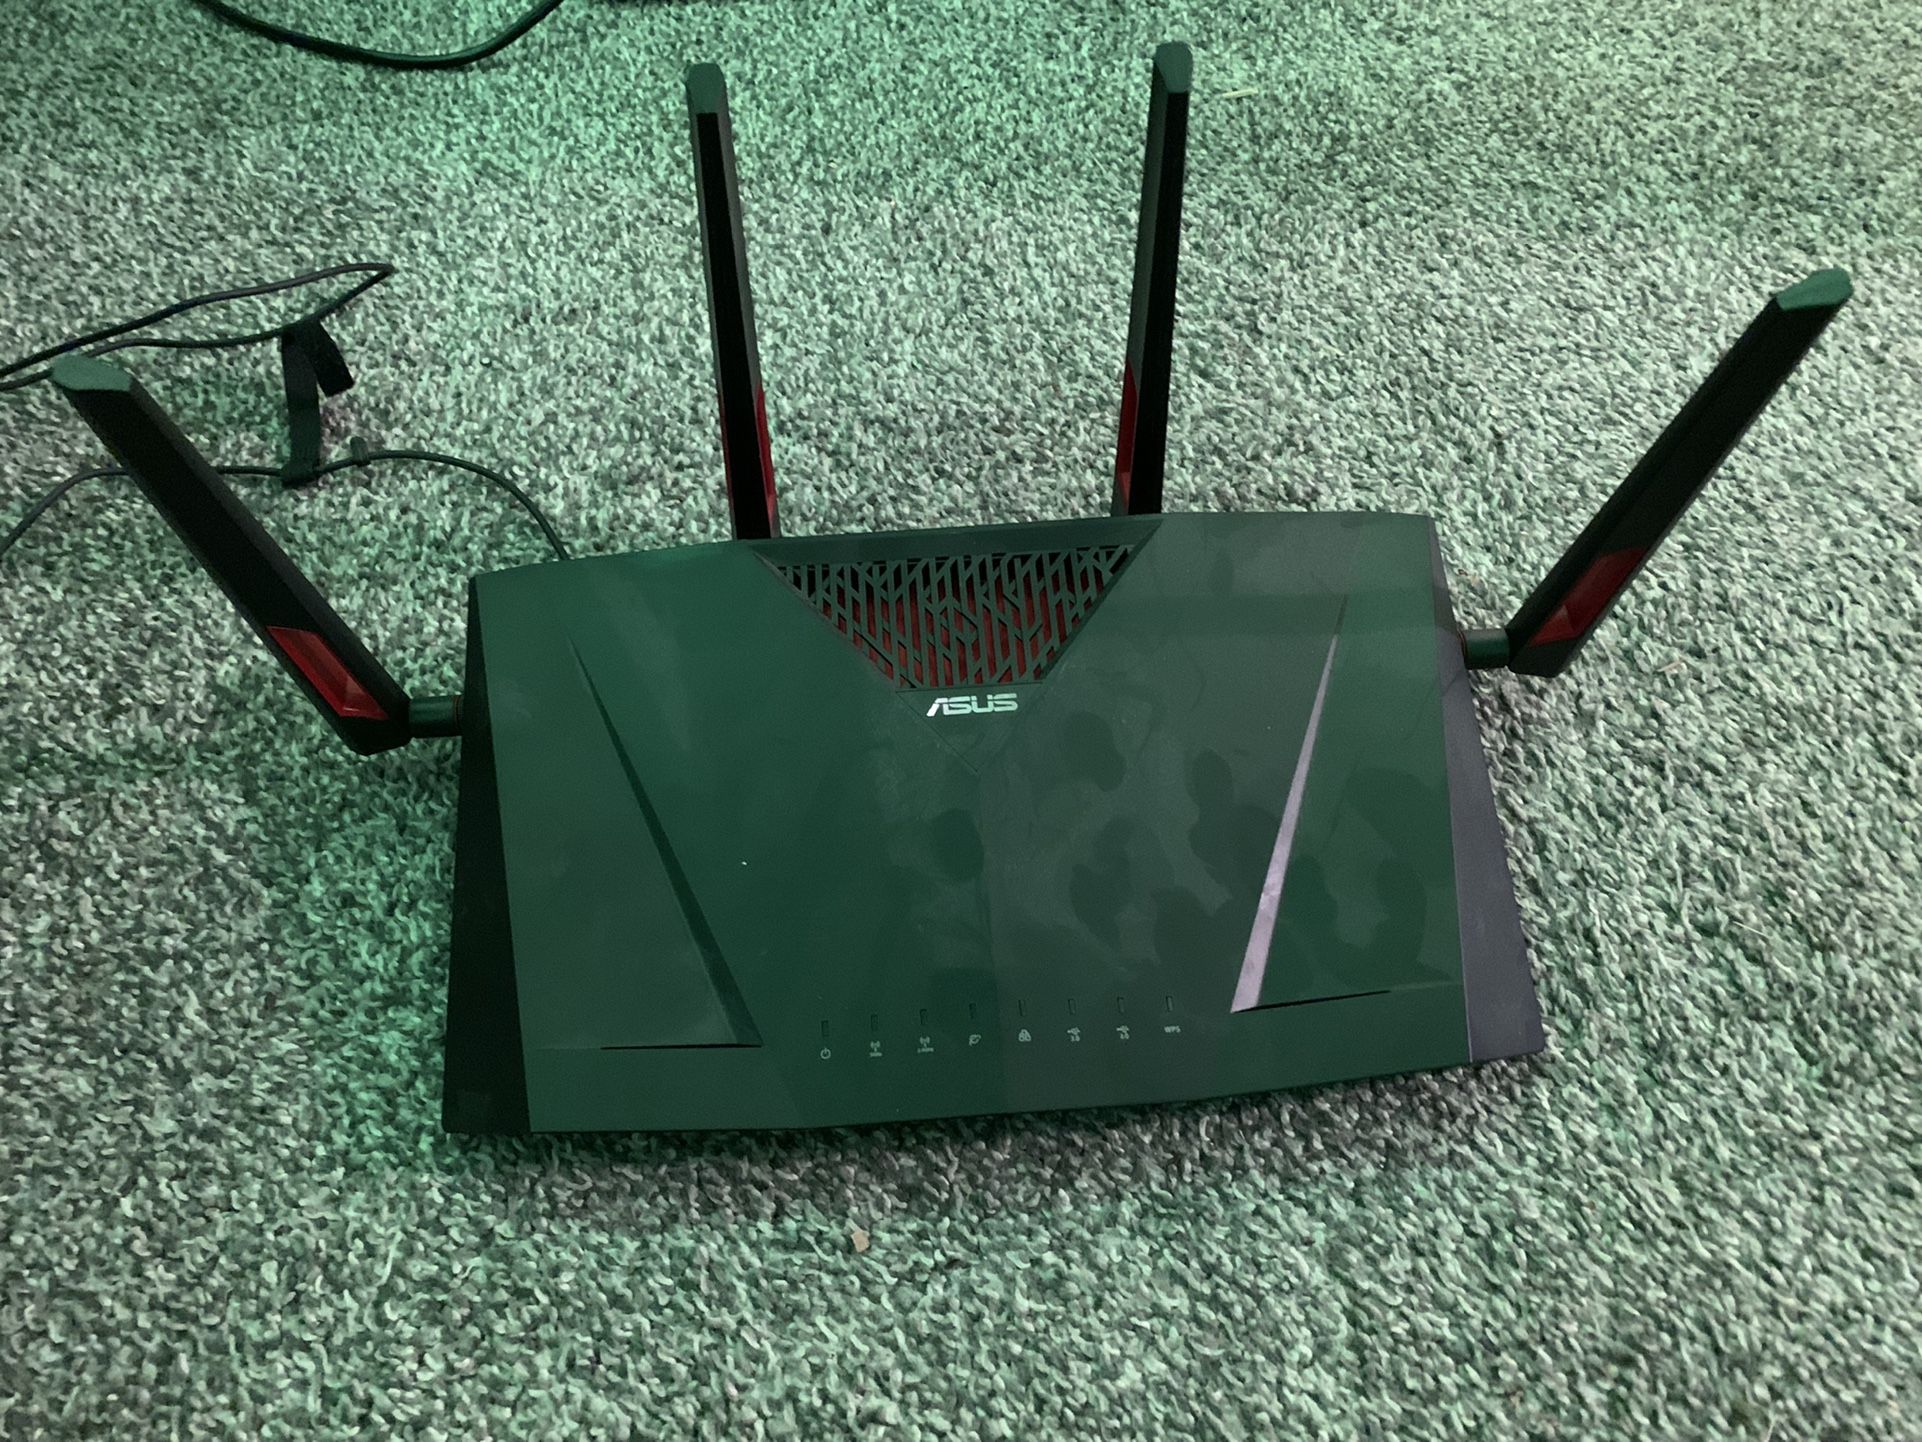 Asus RT-AC3100 Wireless Router